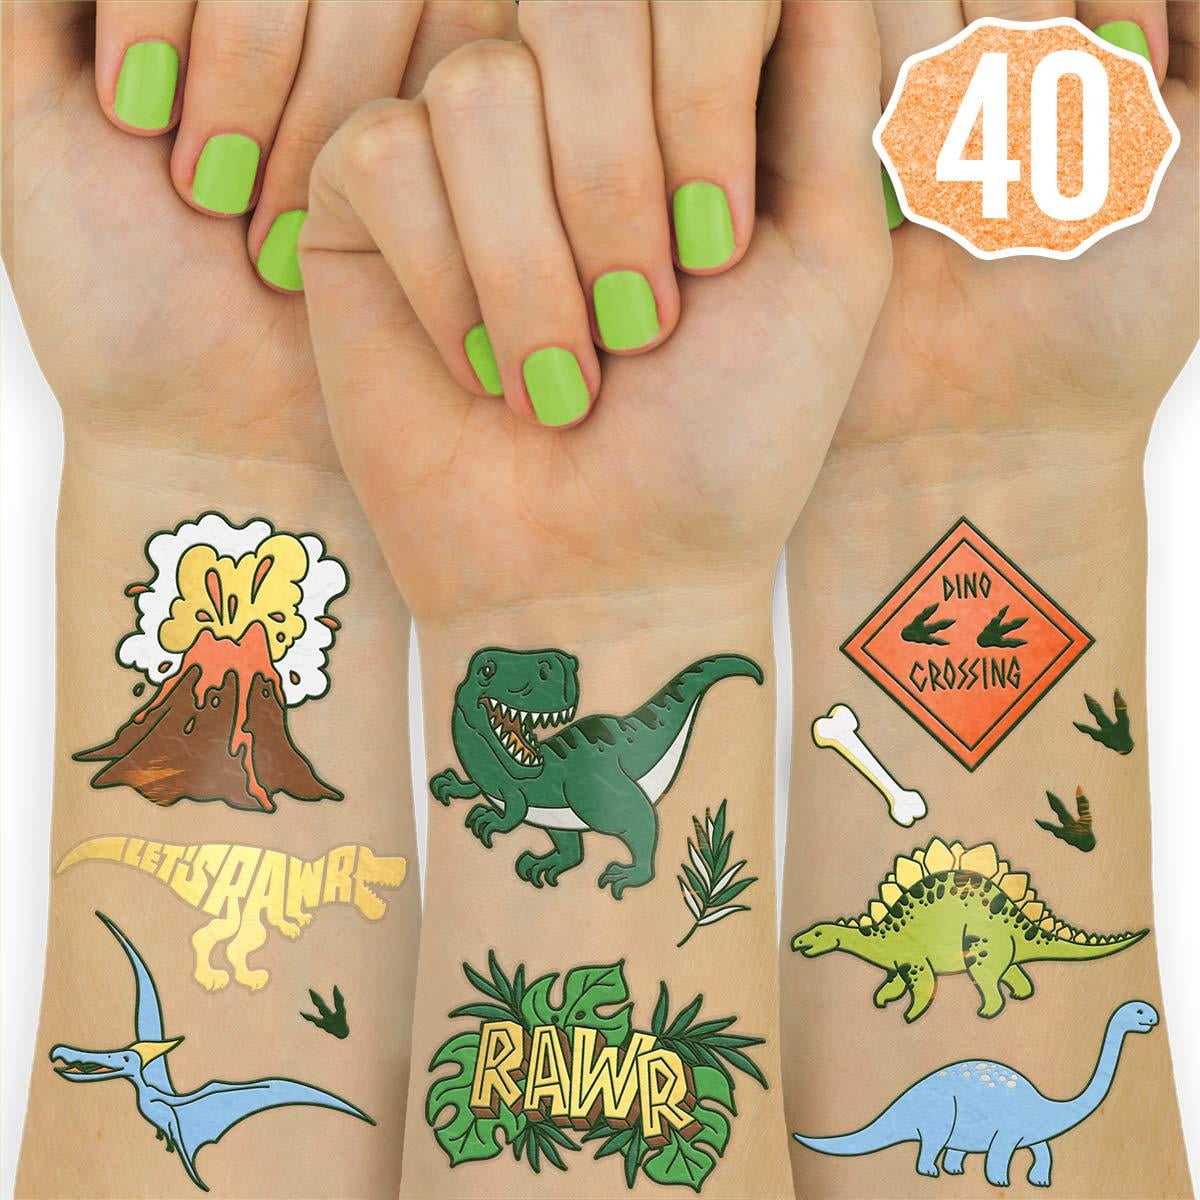 BOYS STYLES PK 12 CHILDRENS TEMPORARY TATTOOS PARTY/LOOT BAG FILLERS GIRLS 